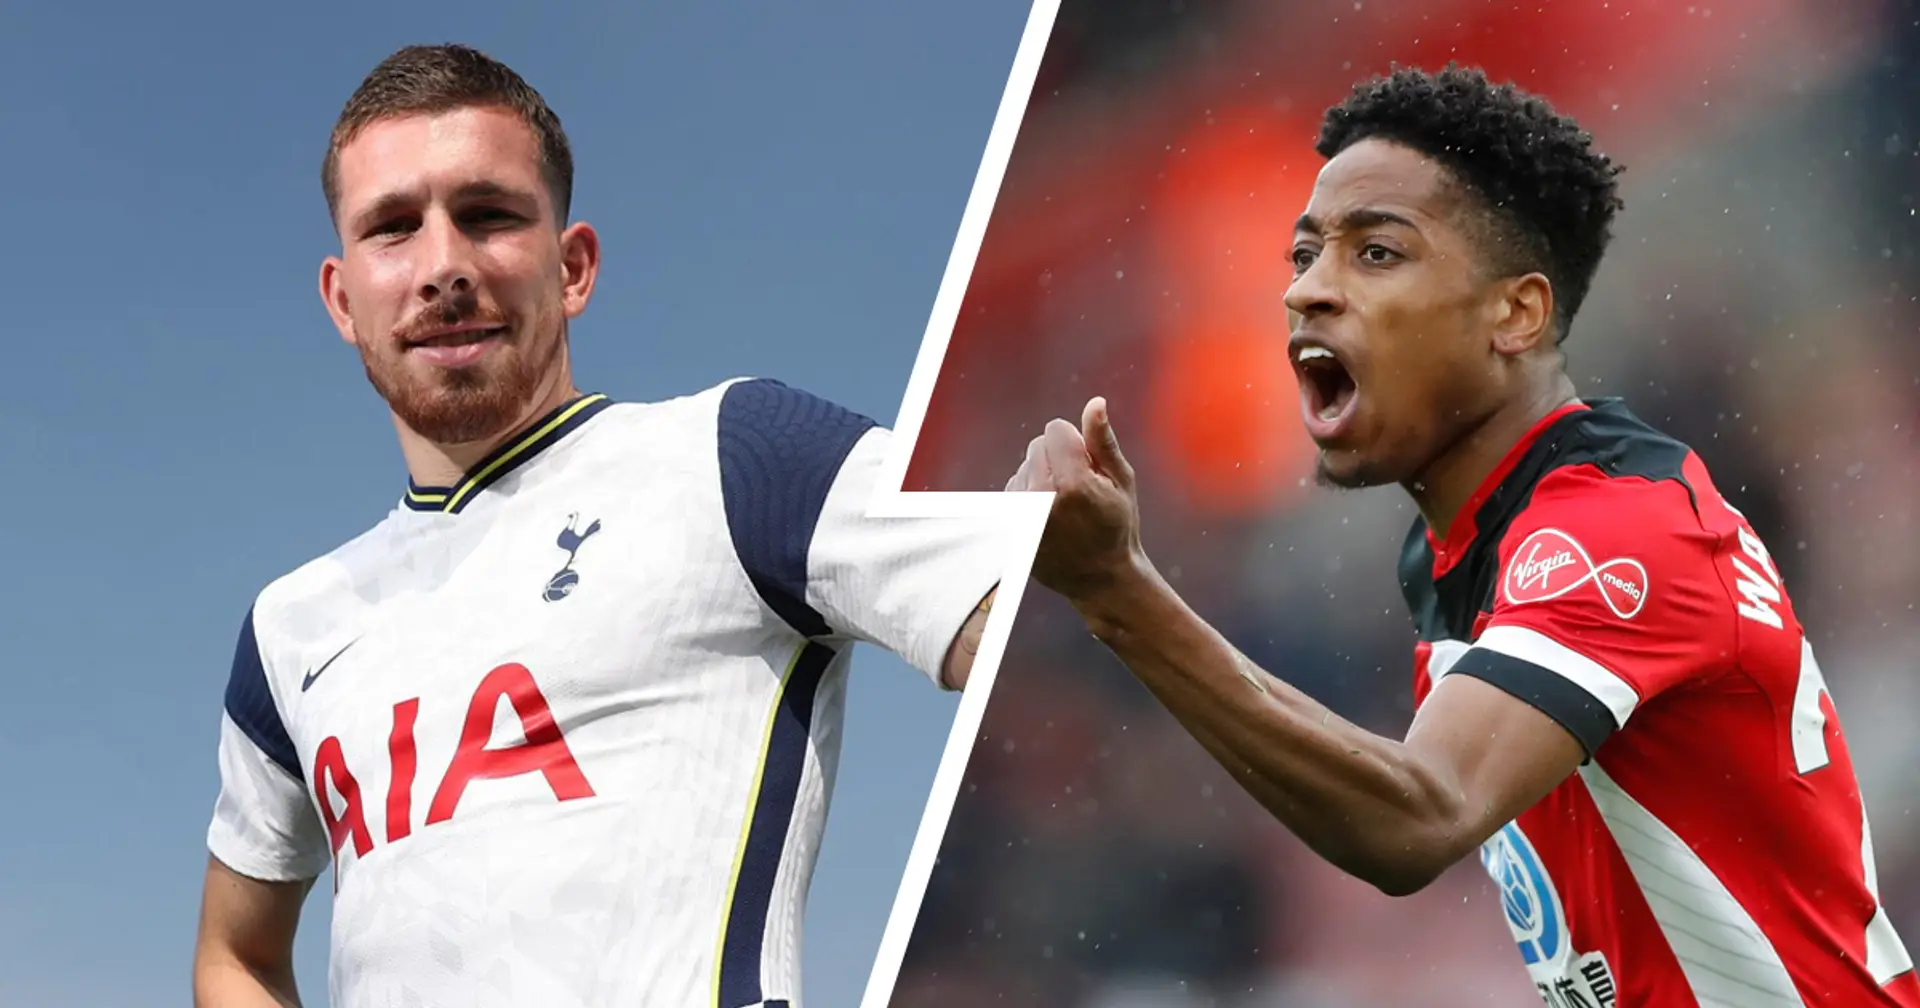 Tottenham sign Hojbjerg from Southampton in a £15m deal, Walker-Pieters goes the other way